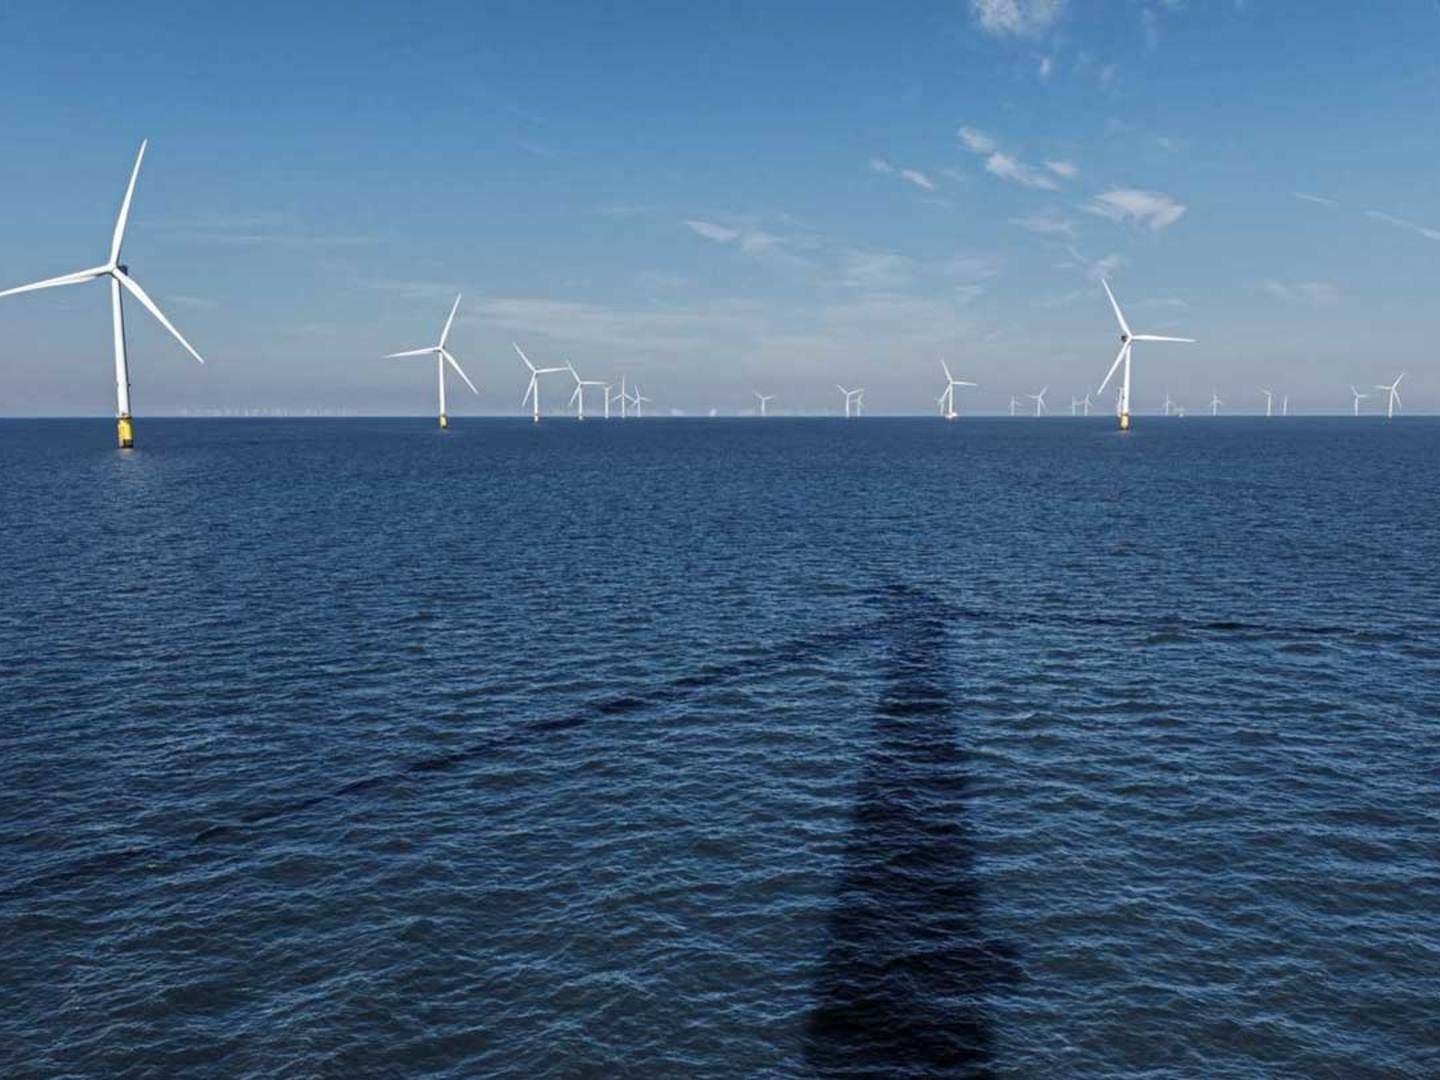 The expiry of subsidies for Horns Rev 2 is highlighted as one reason Ørsted expects a lower operating result from offshore wind in 2021. | Photo: Ørsted